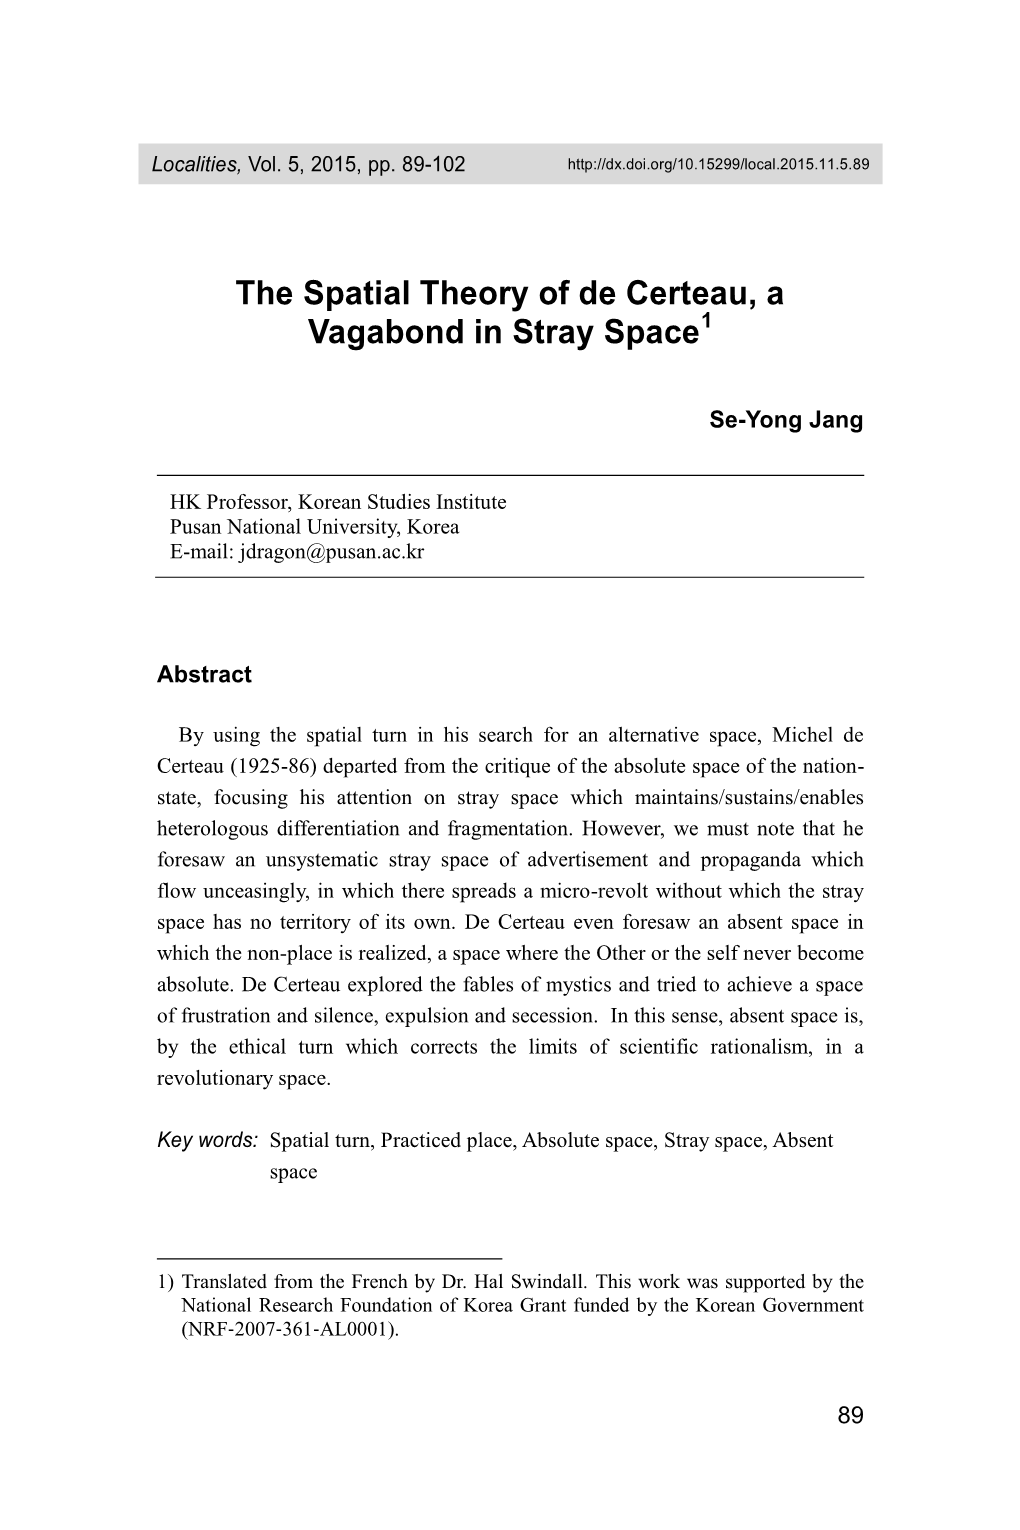 The Spatial Theory of De Certeau, a Vagabond in Stray Space1